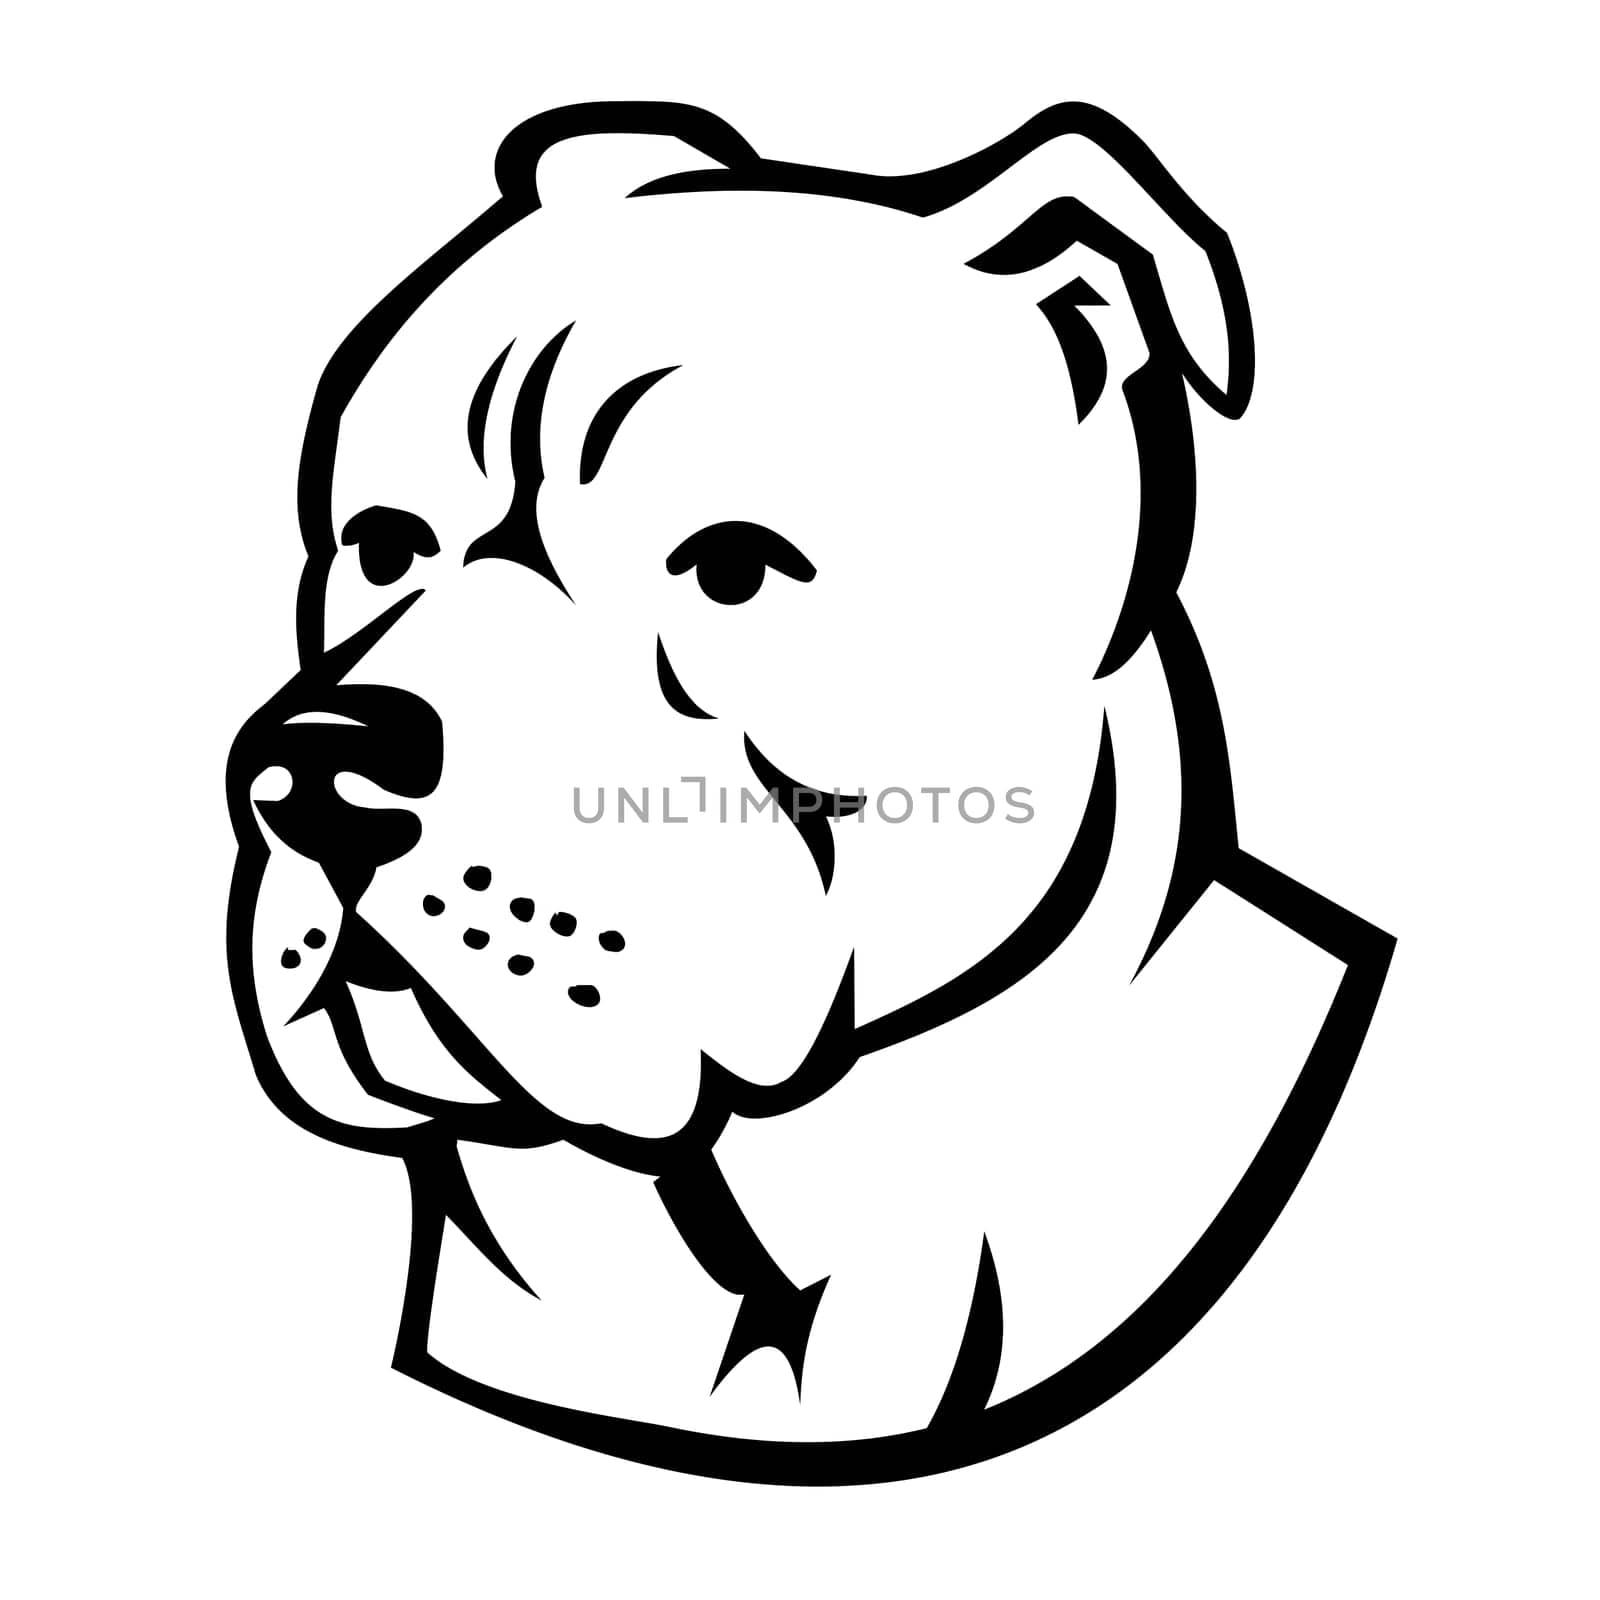 Sports mascot icon illustration of head of an American Bully dog  viewed from side on isolated background in retro style.